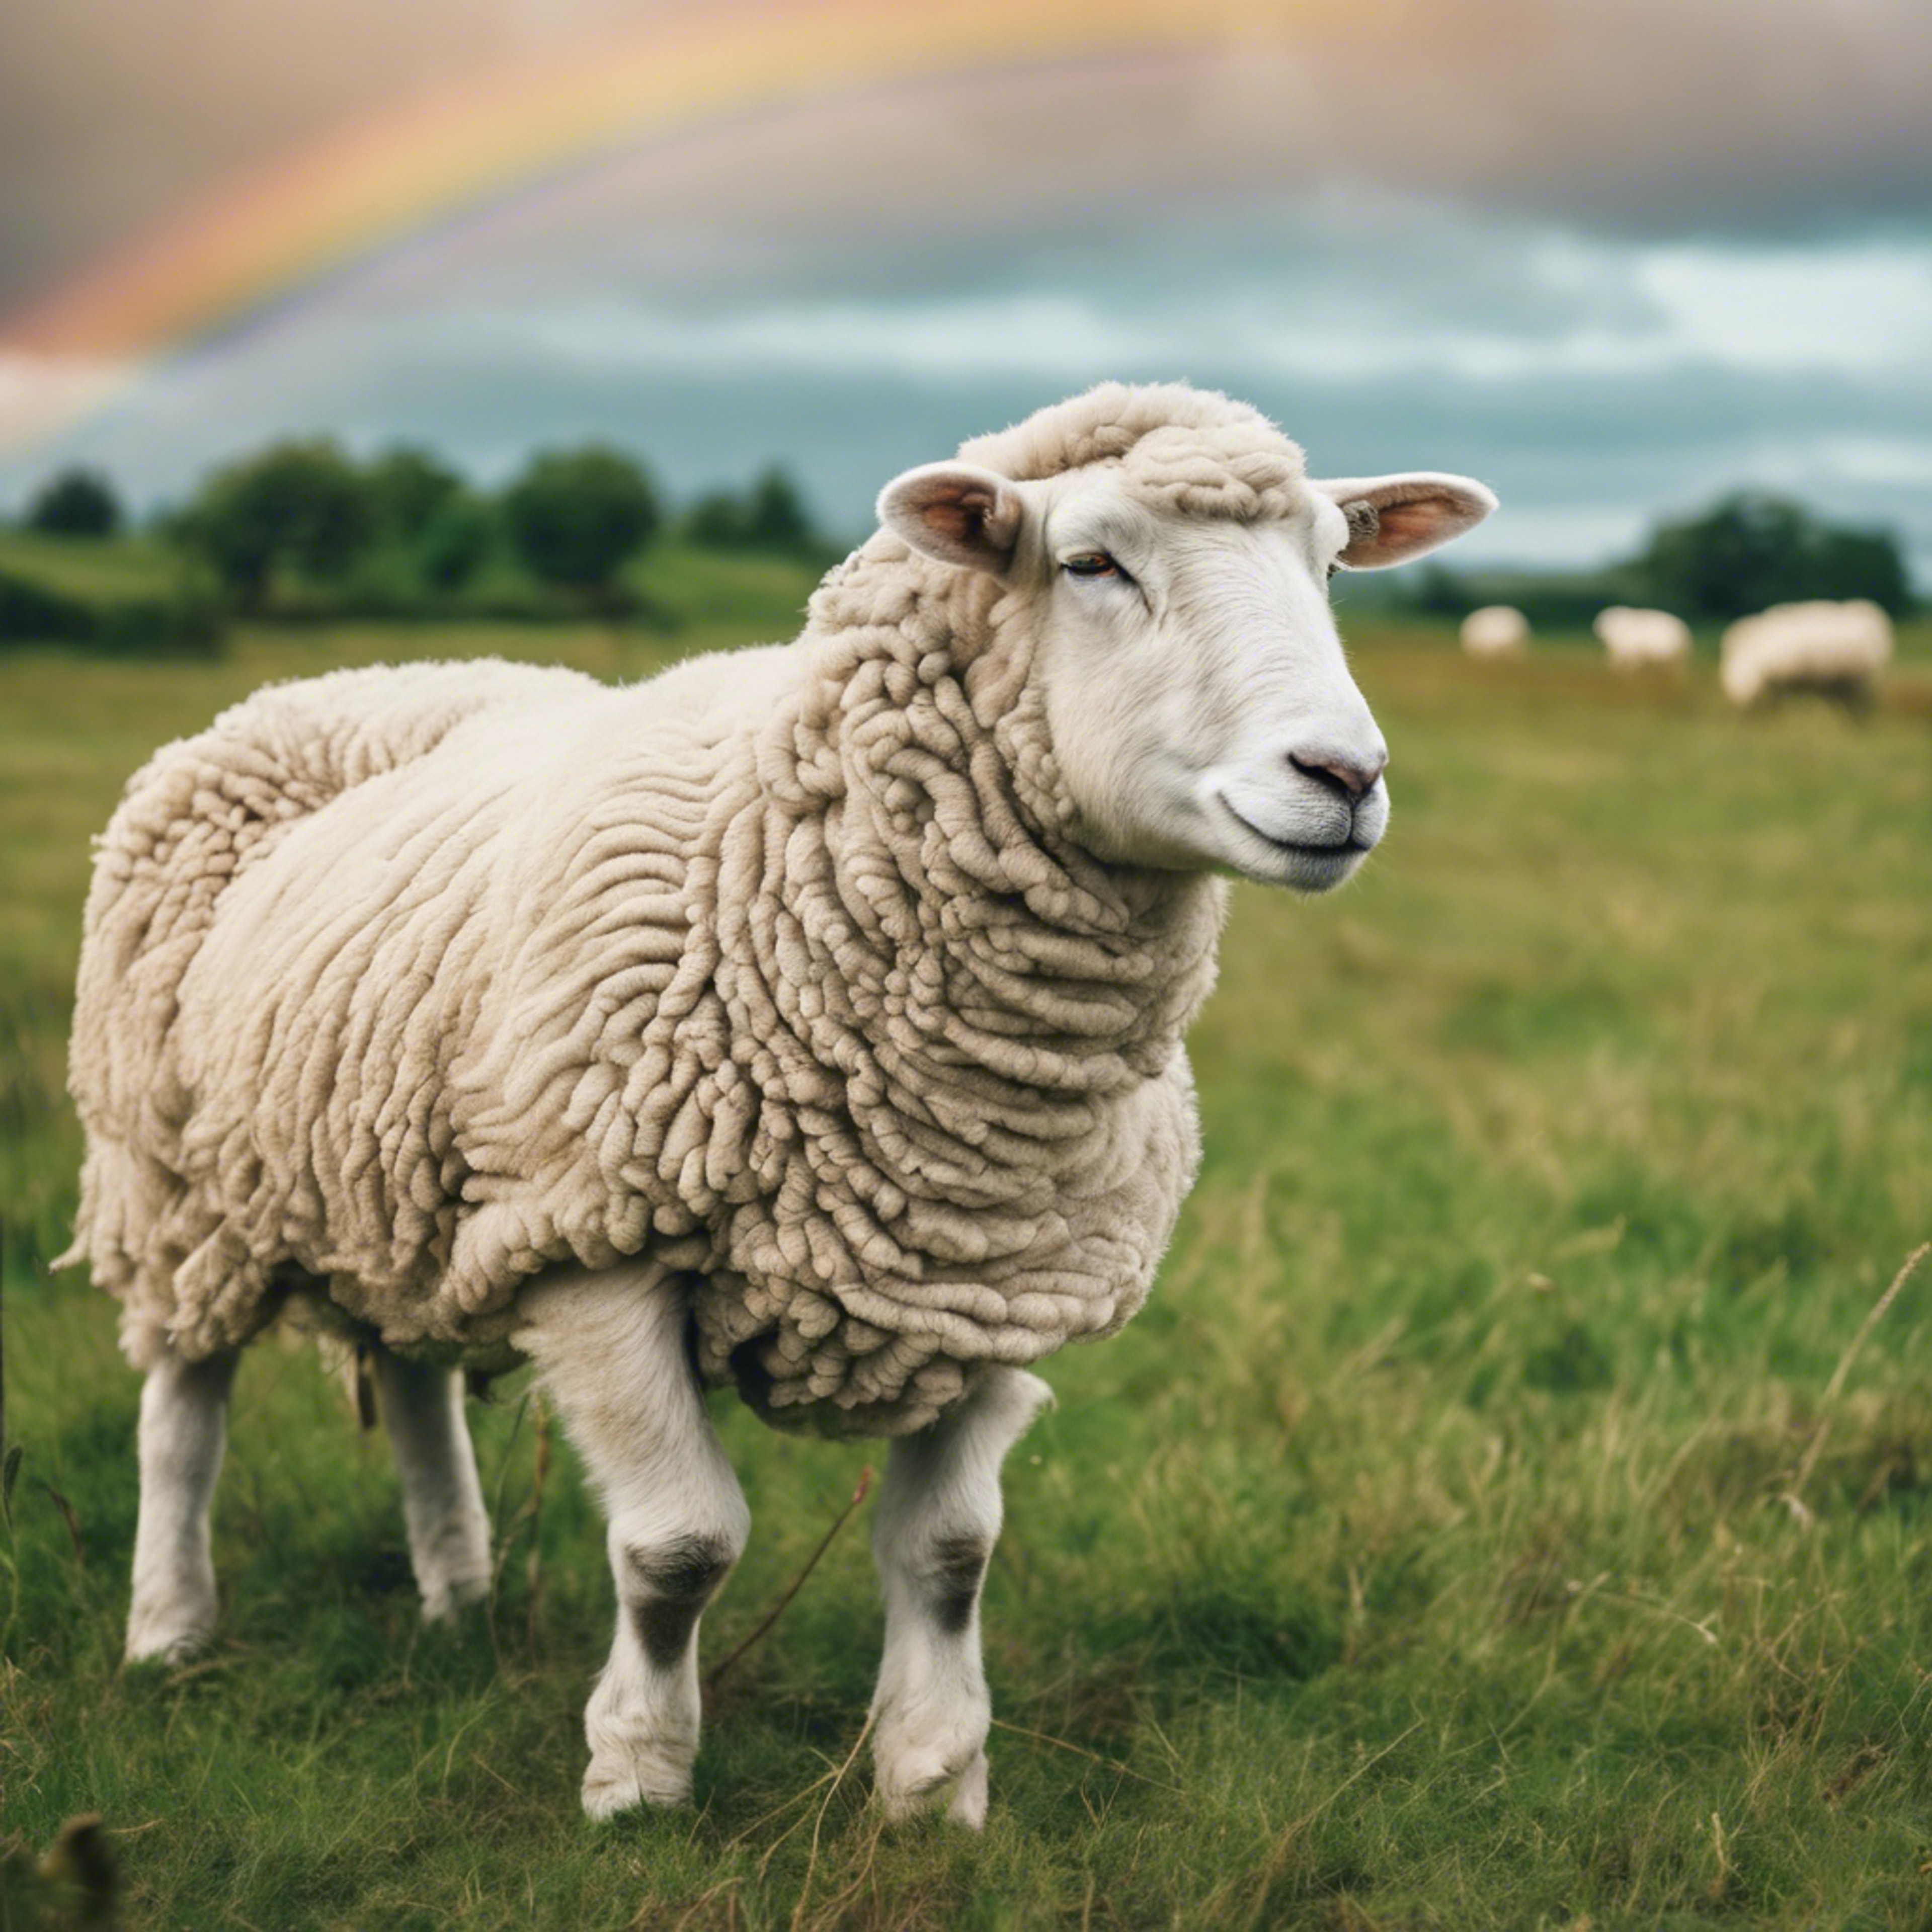 A beautiful open field of grass with puffy white cloud sheep that create rainbow trails as they bound joyfully around. Wallpaper[bc005b864b354d3896db]